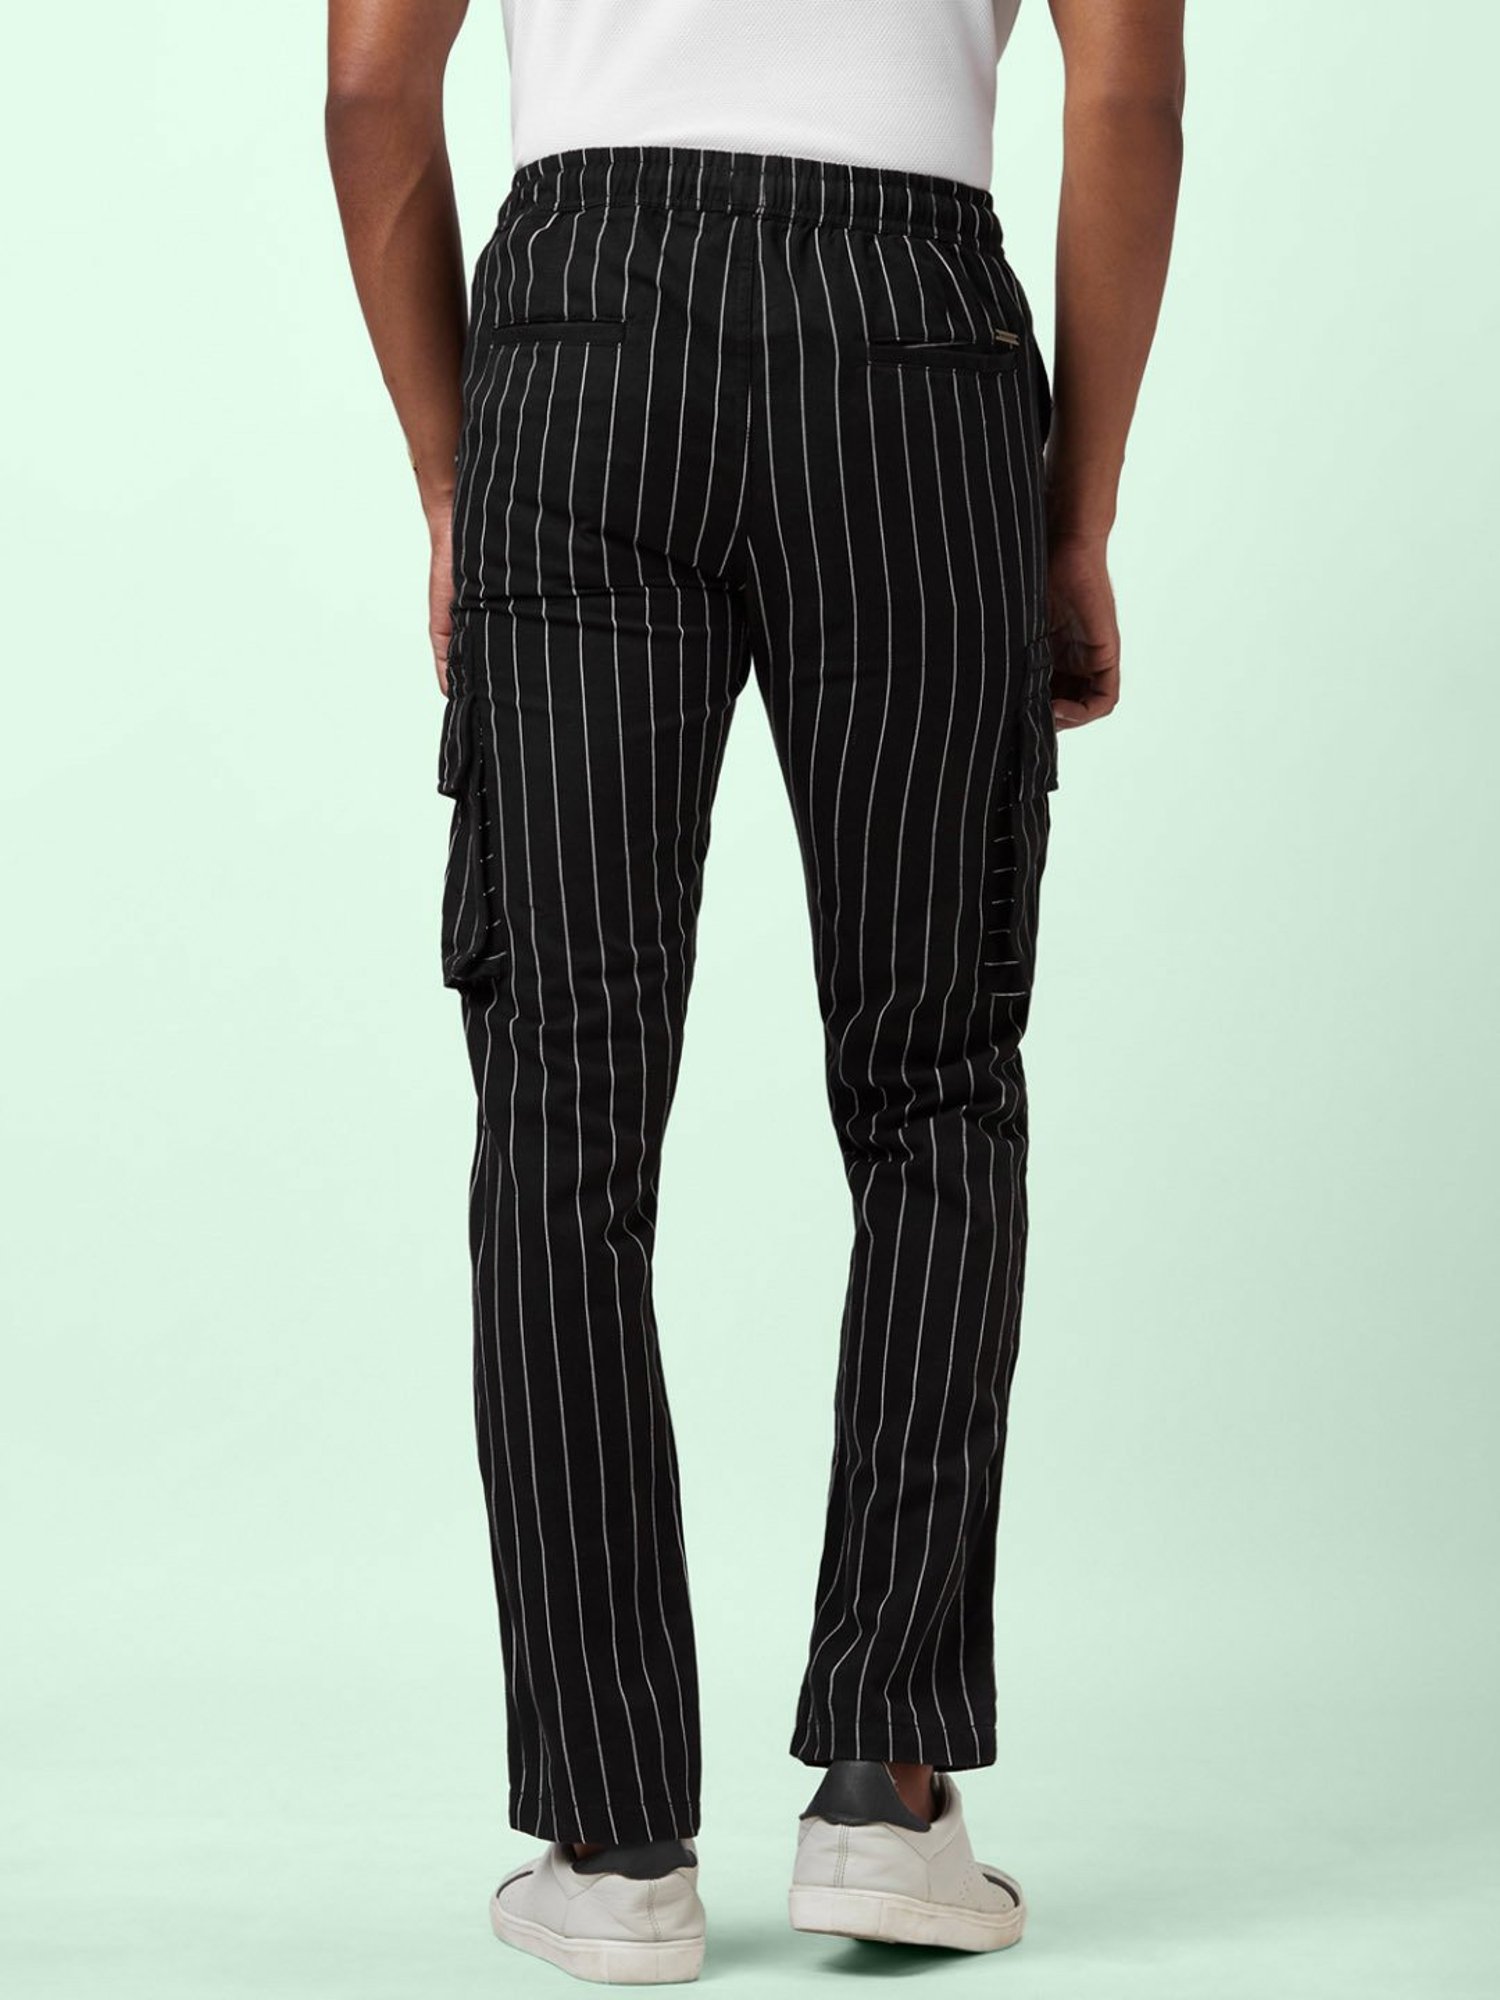 Mystere Paris Black  White Striped Mid Rise Relaxed Fit Pants